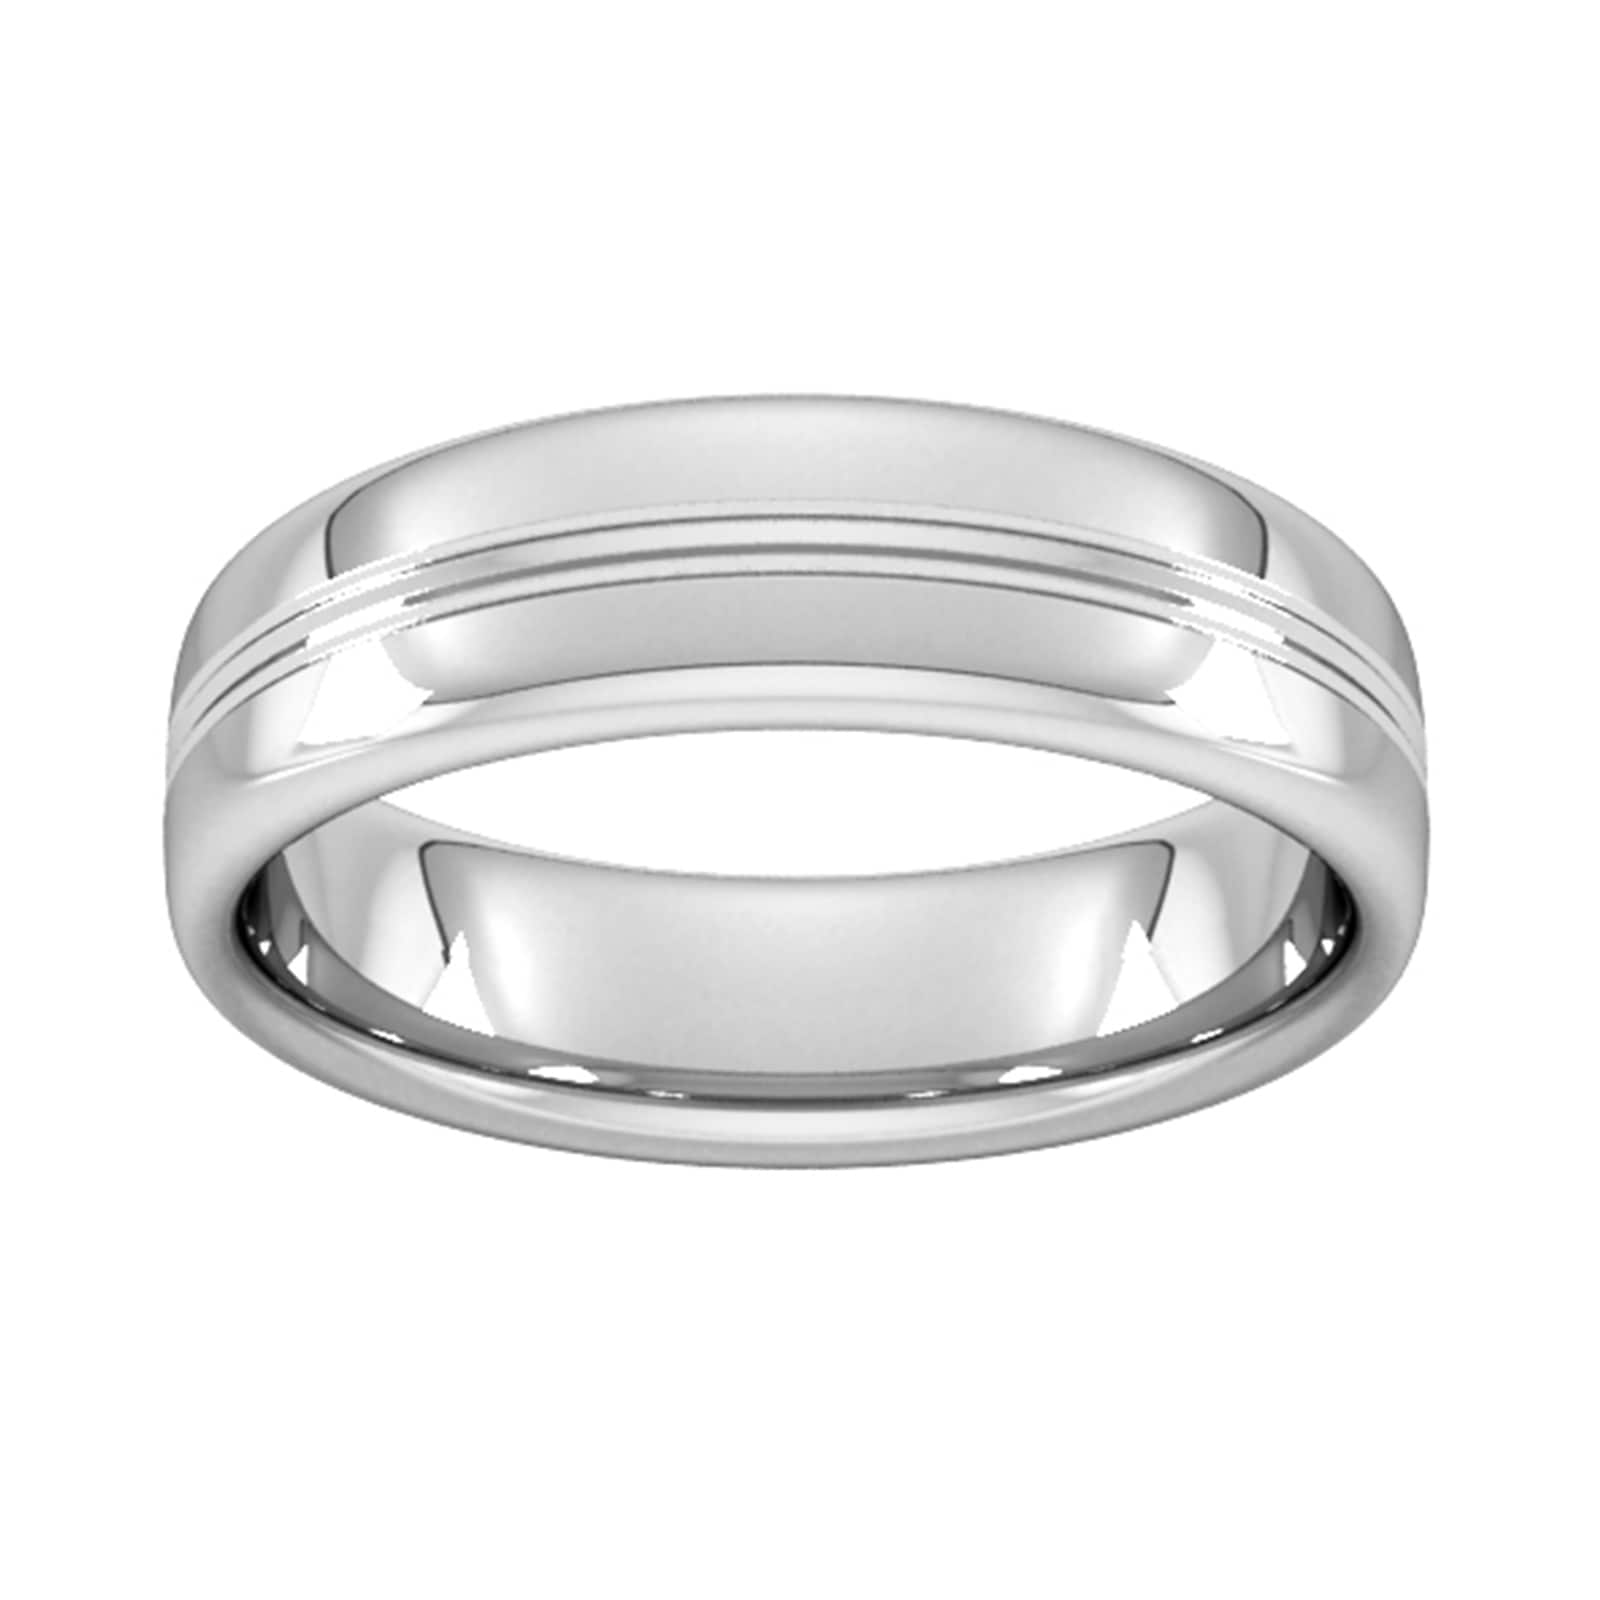 6mm Slight Court Heavy Grooved Polished Finish Wedding Ring In 18 Carat White Gold - Ring Size V